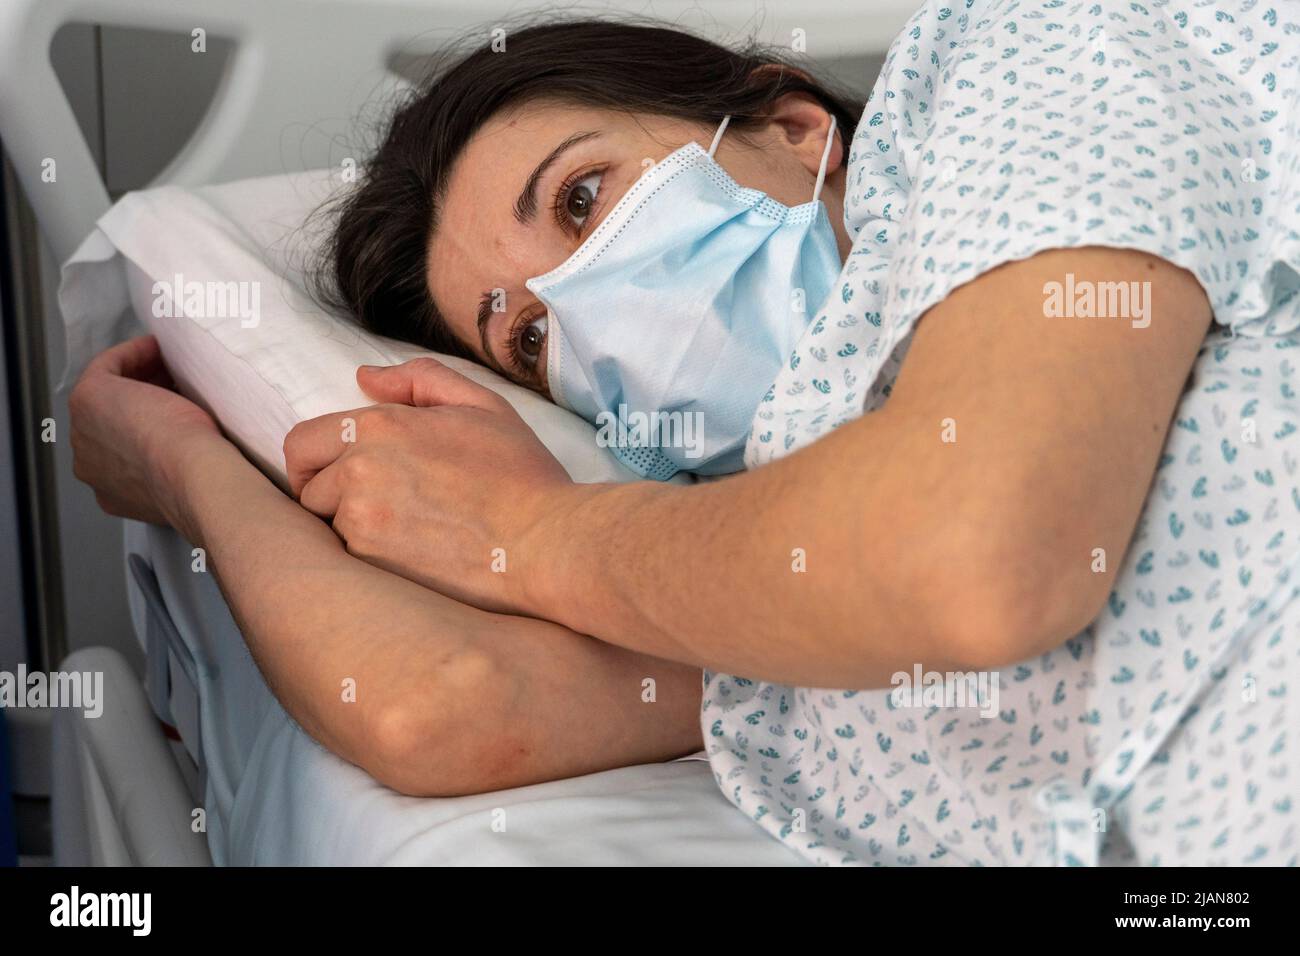 Hospitalized young woman wearing a face mask while lying in an hospital ward bed Stock Photo